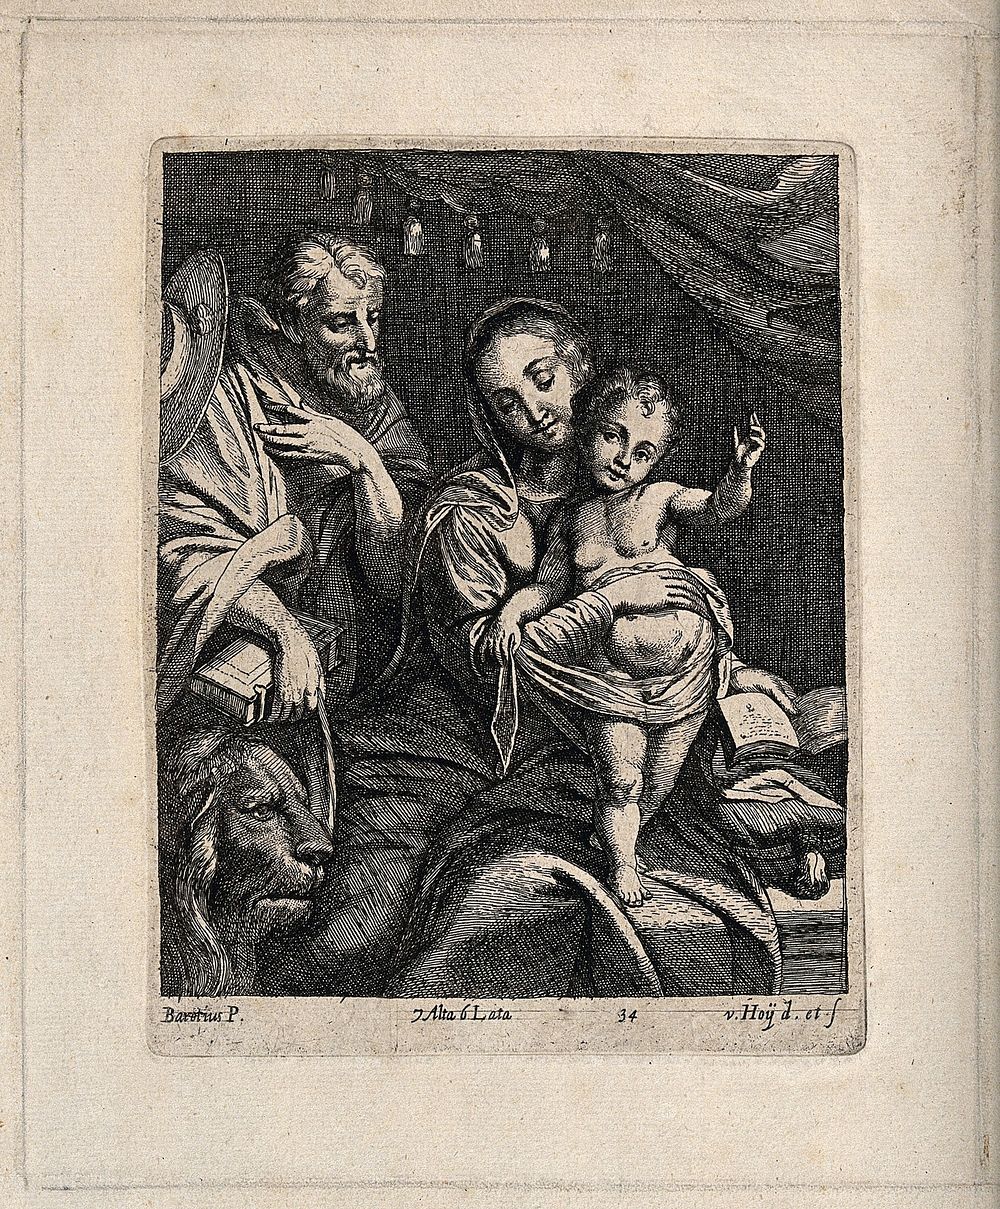 Saint Mary (the Blessed Virgin) with the Christ Child and Saint Jerome. Etching by N. van Hoy after F. Barocci.